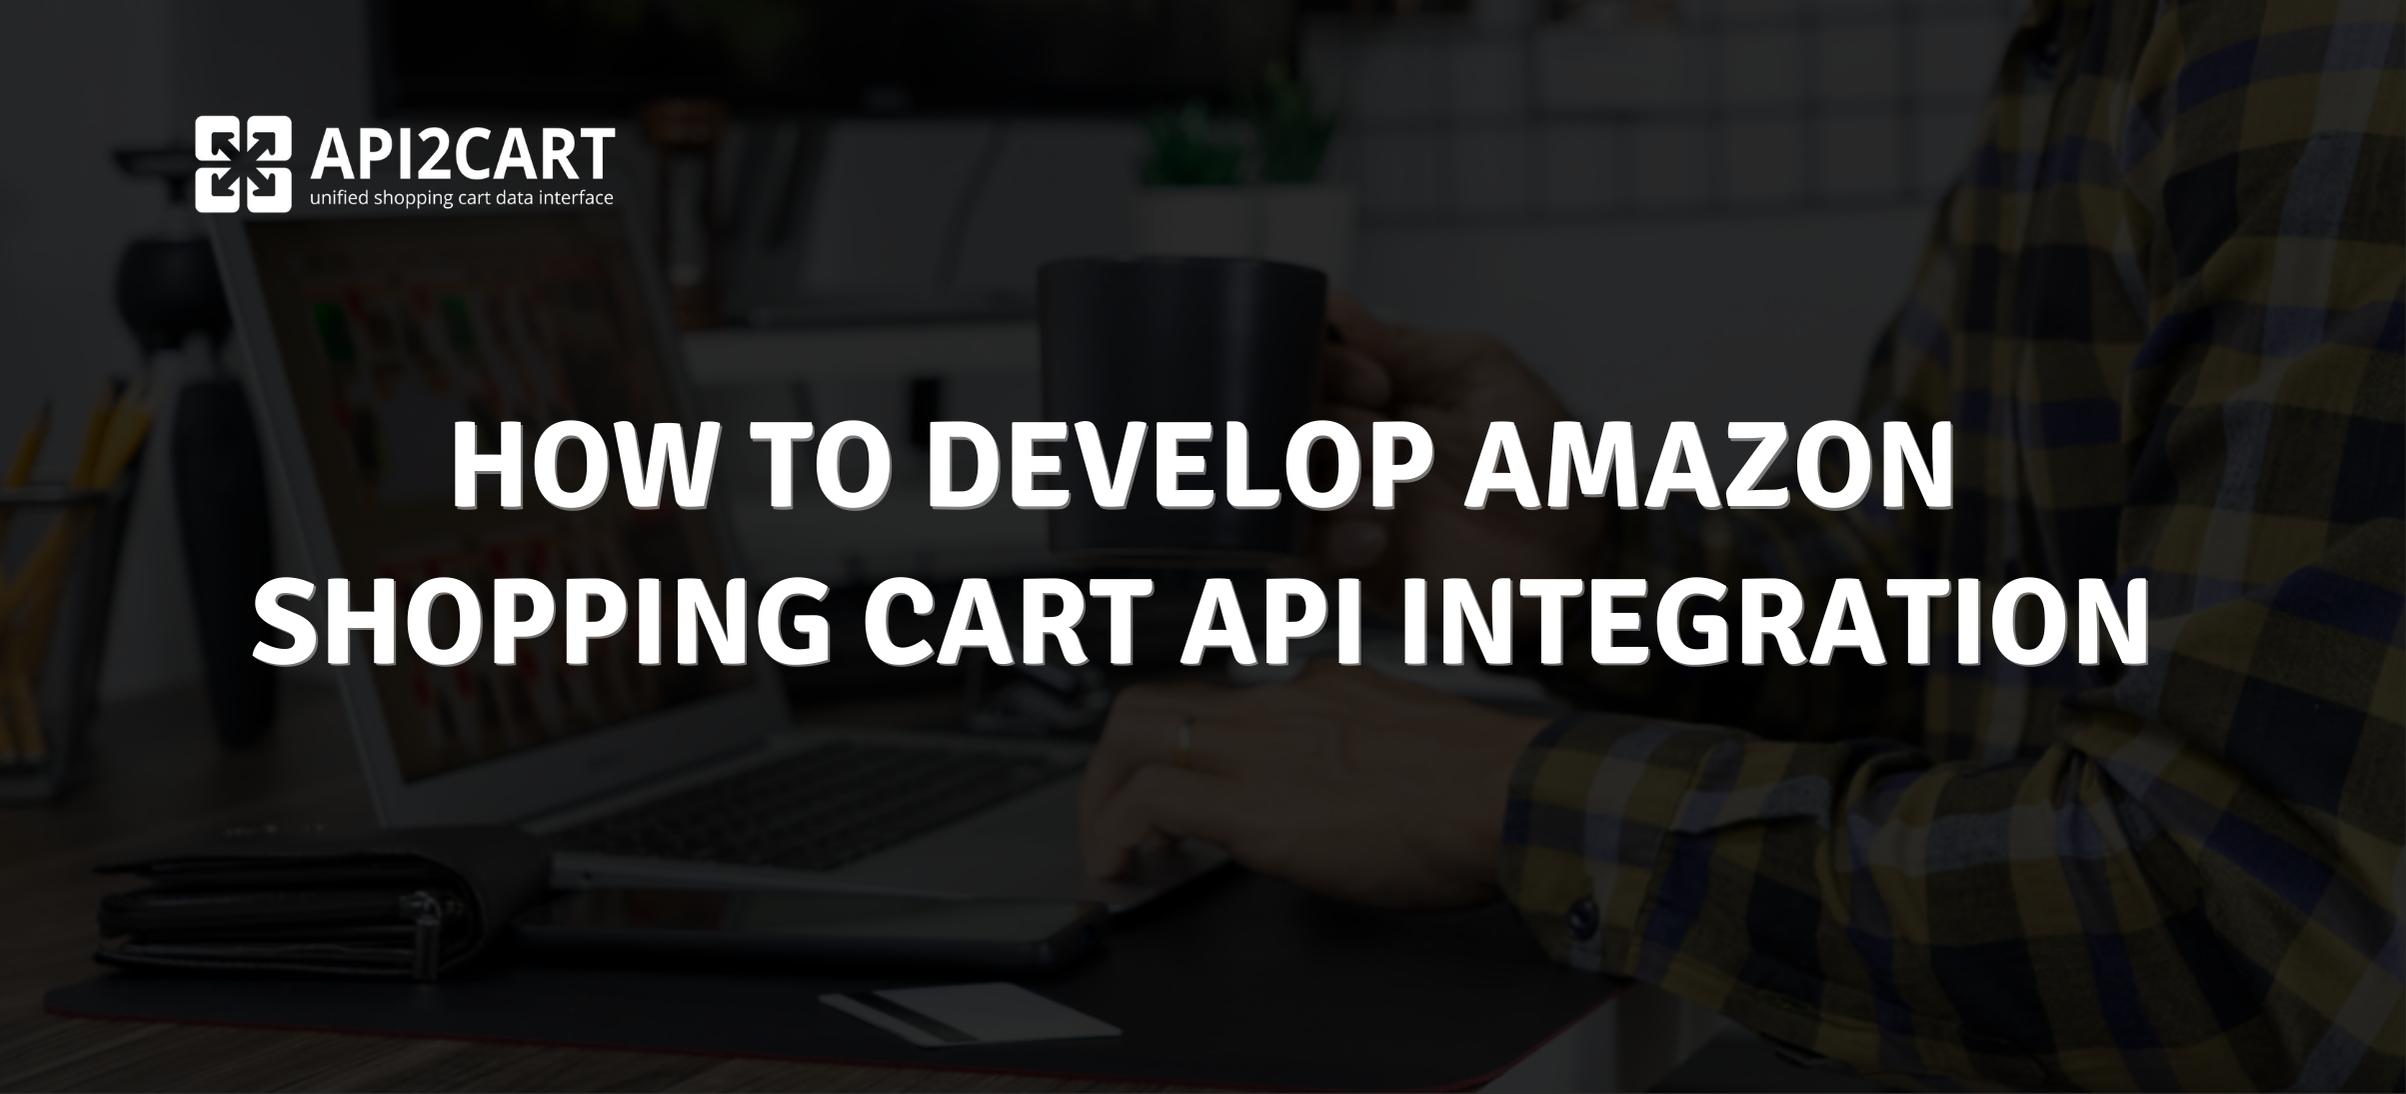 How to Develop Amazon Shopping Cart API Integration